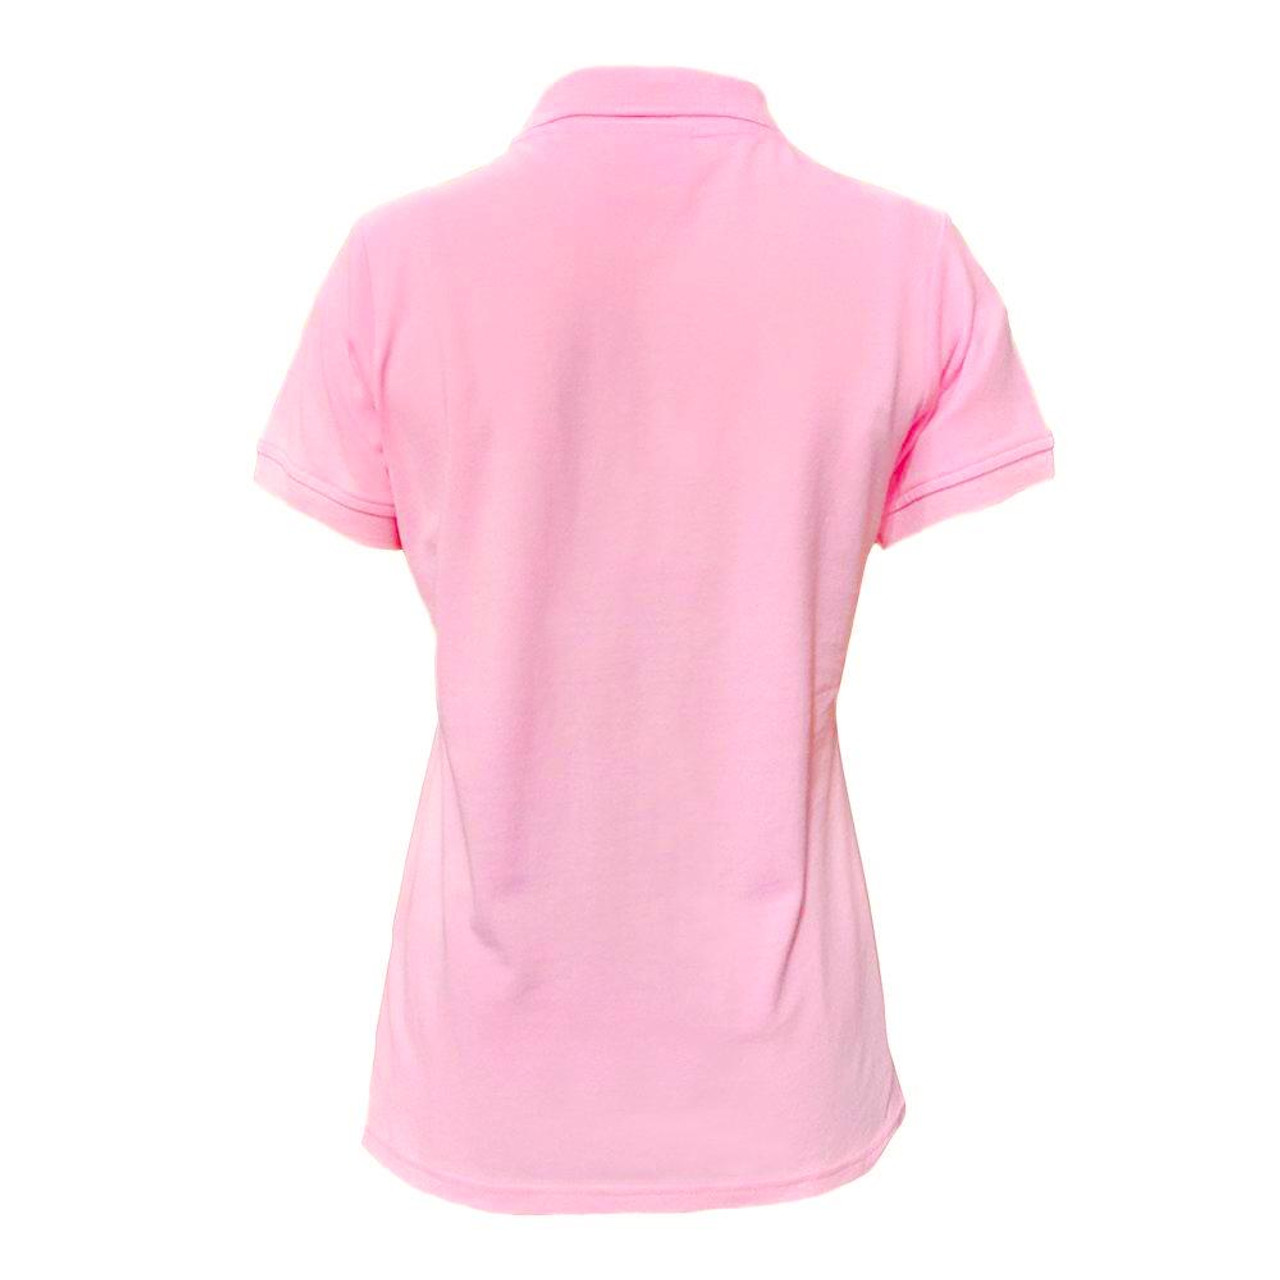 Born Out Here BLP7001 Ladies Short Sleeve Polo Shirt in Musk